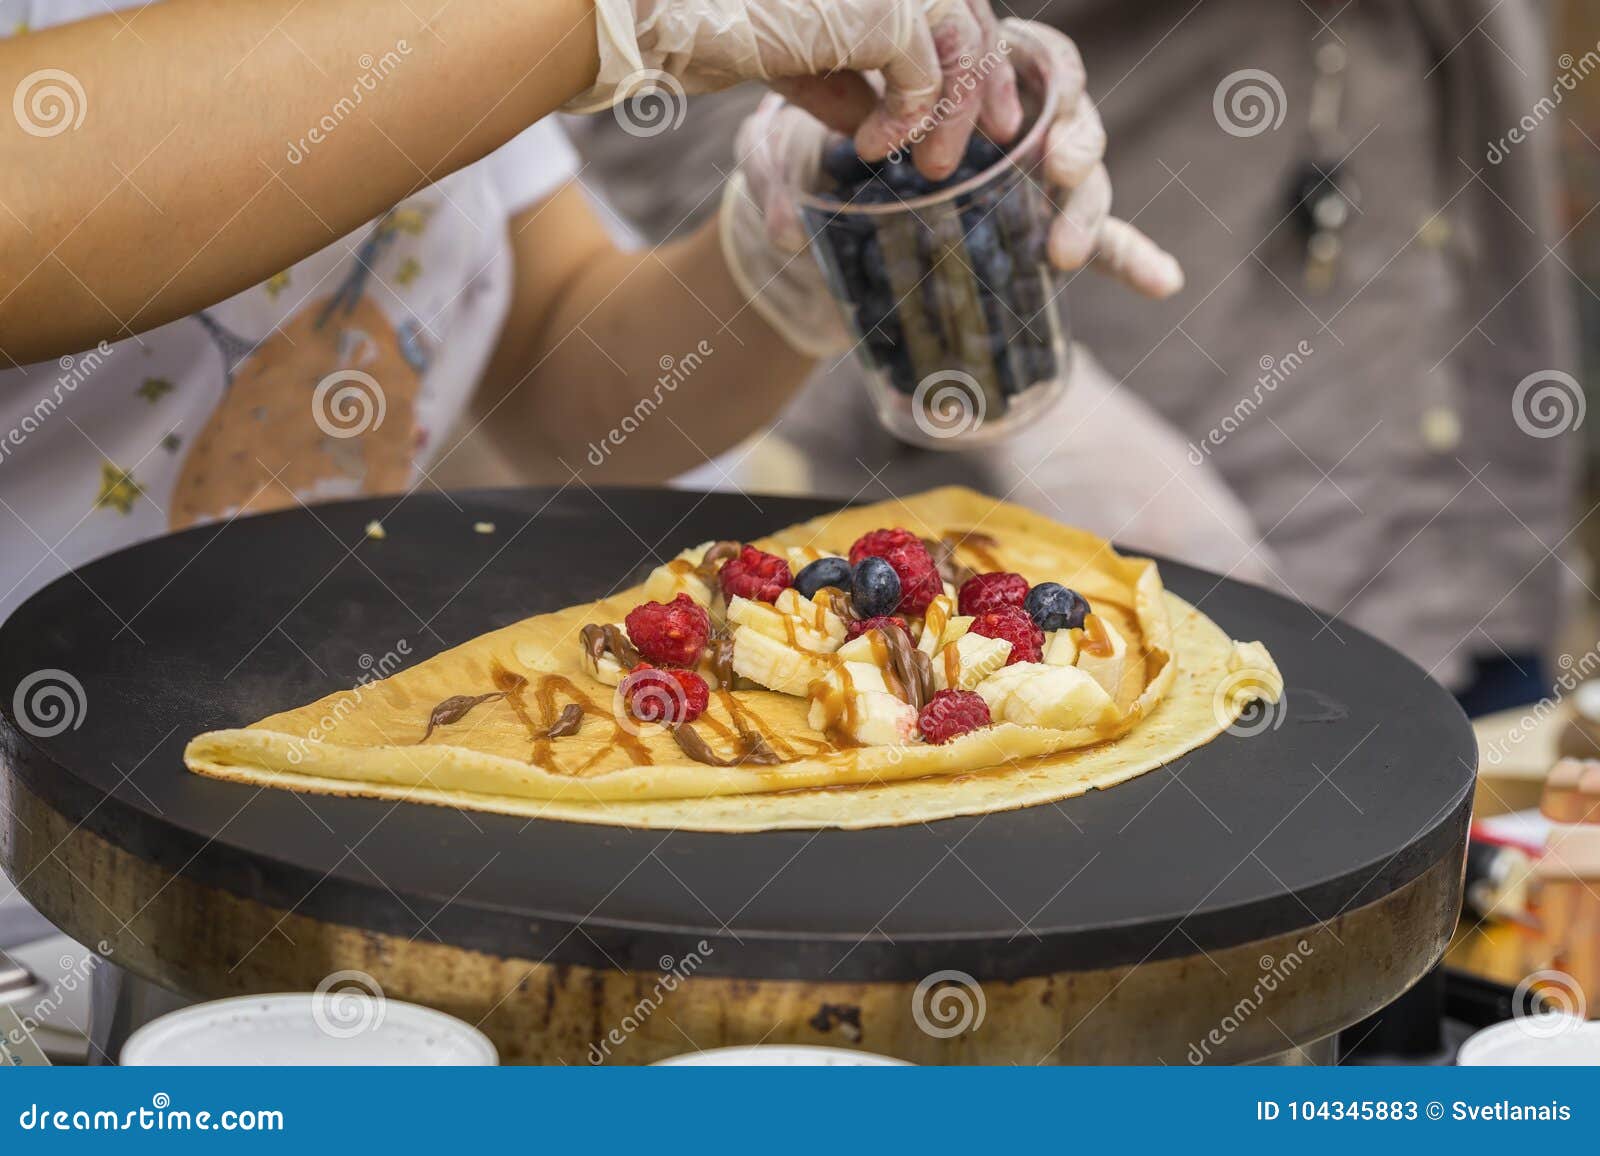 close-up of hands of cook in gloves preparing crepe, pancake on frying pan with fresh banana, blueberry, raspberry